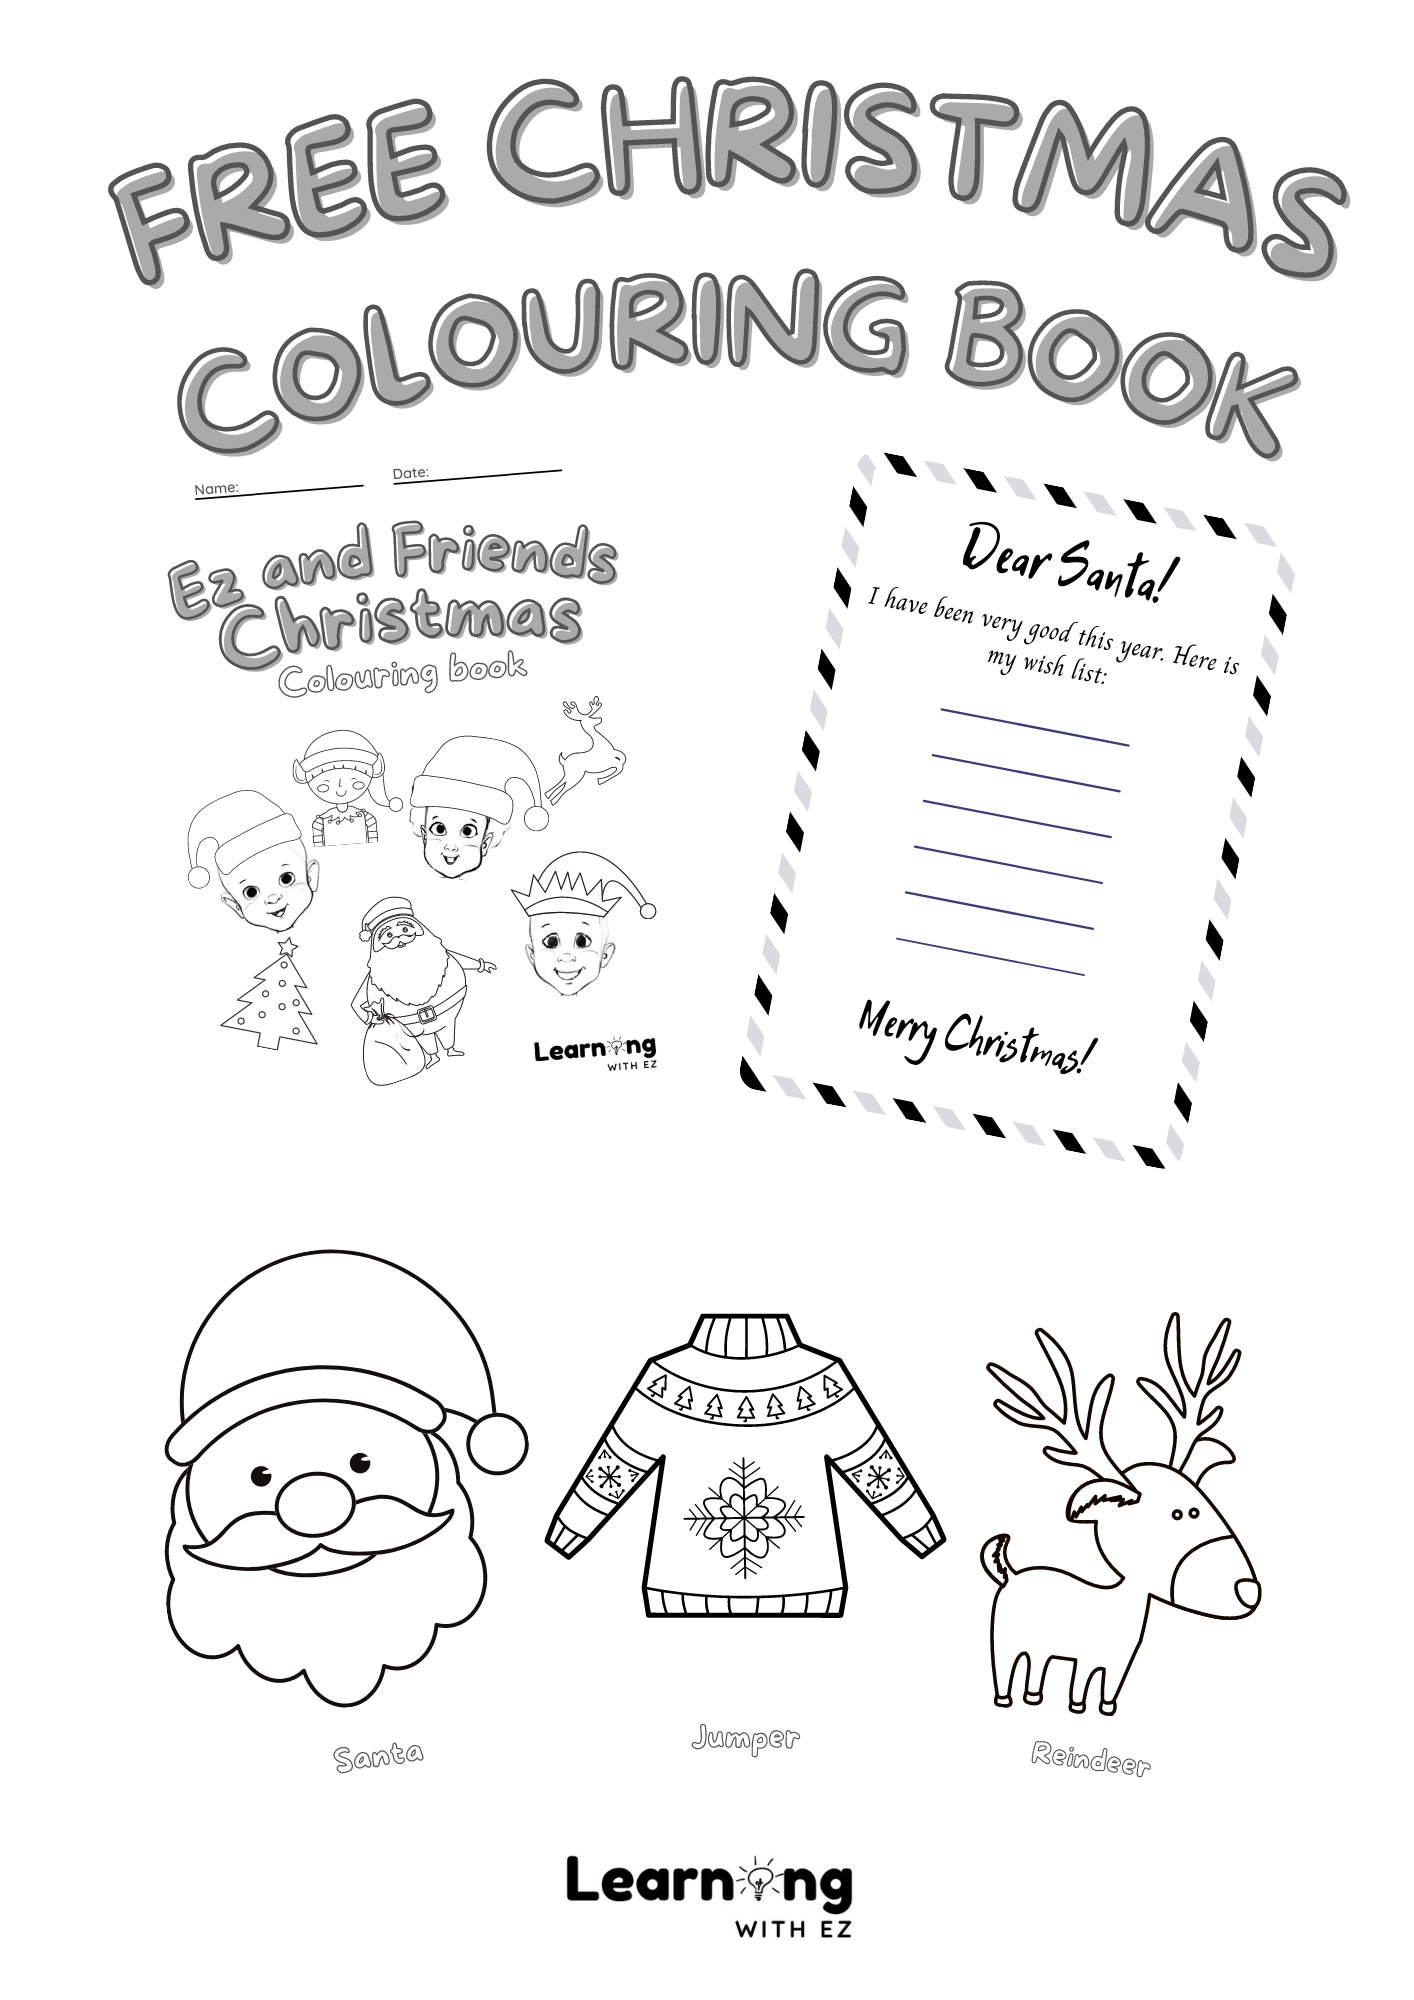 FREE Christmas Colouring Book (Digital Download)